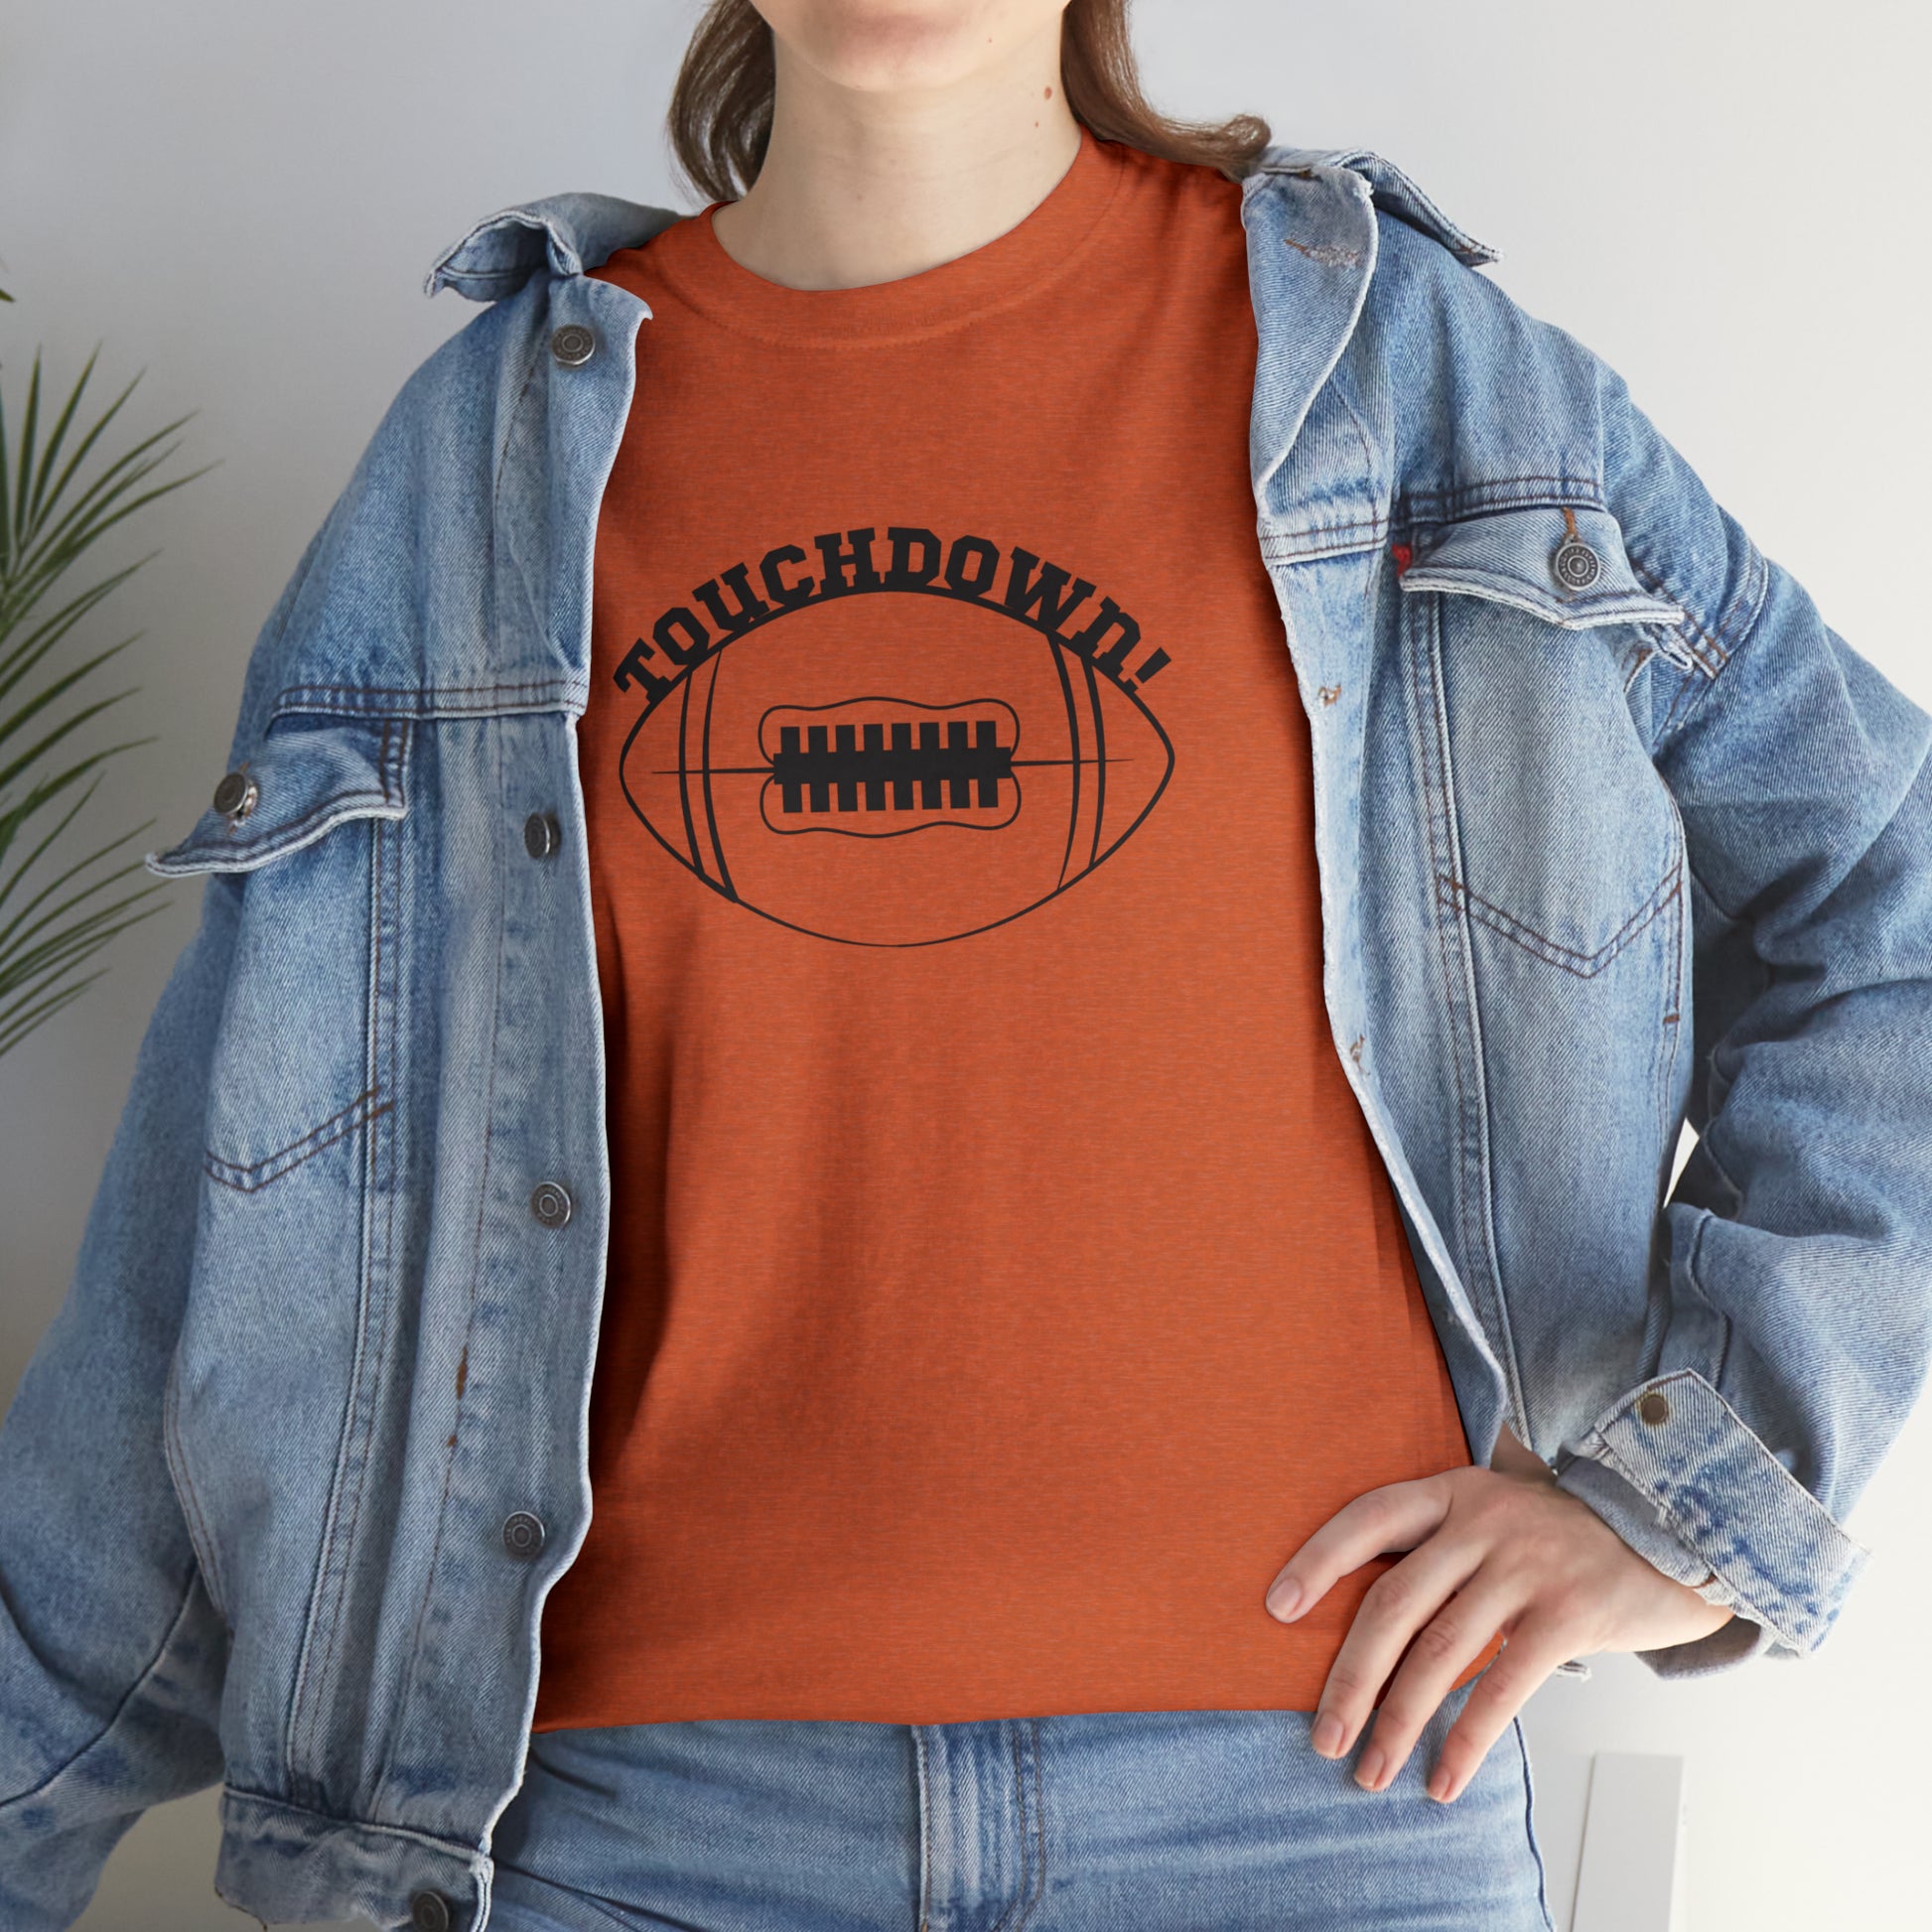 "Touchdown" T-Shirt - Weave Got Gifts - Unique Gifts You Won’t Find Anywhere Else!